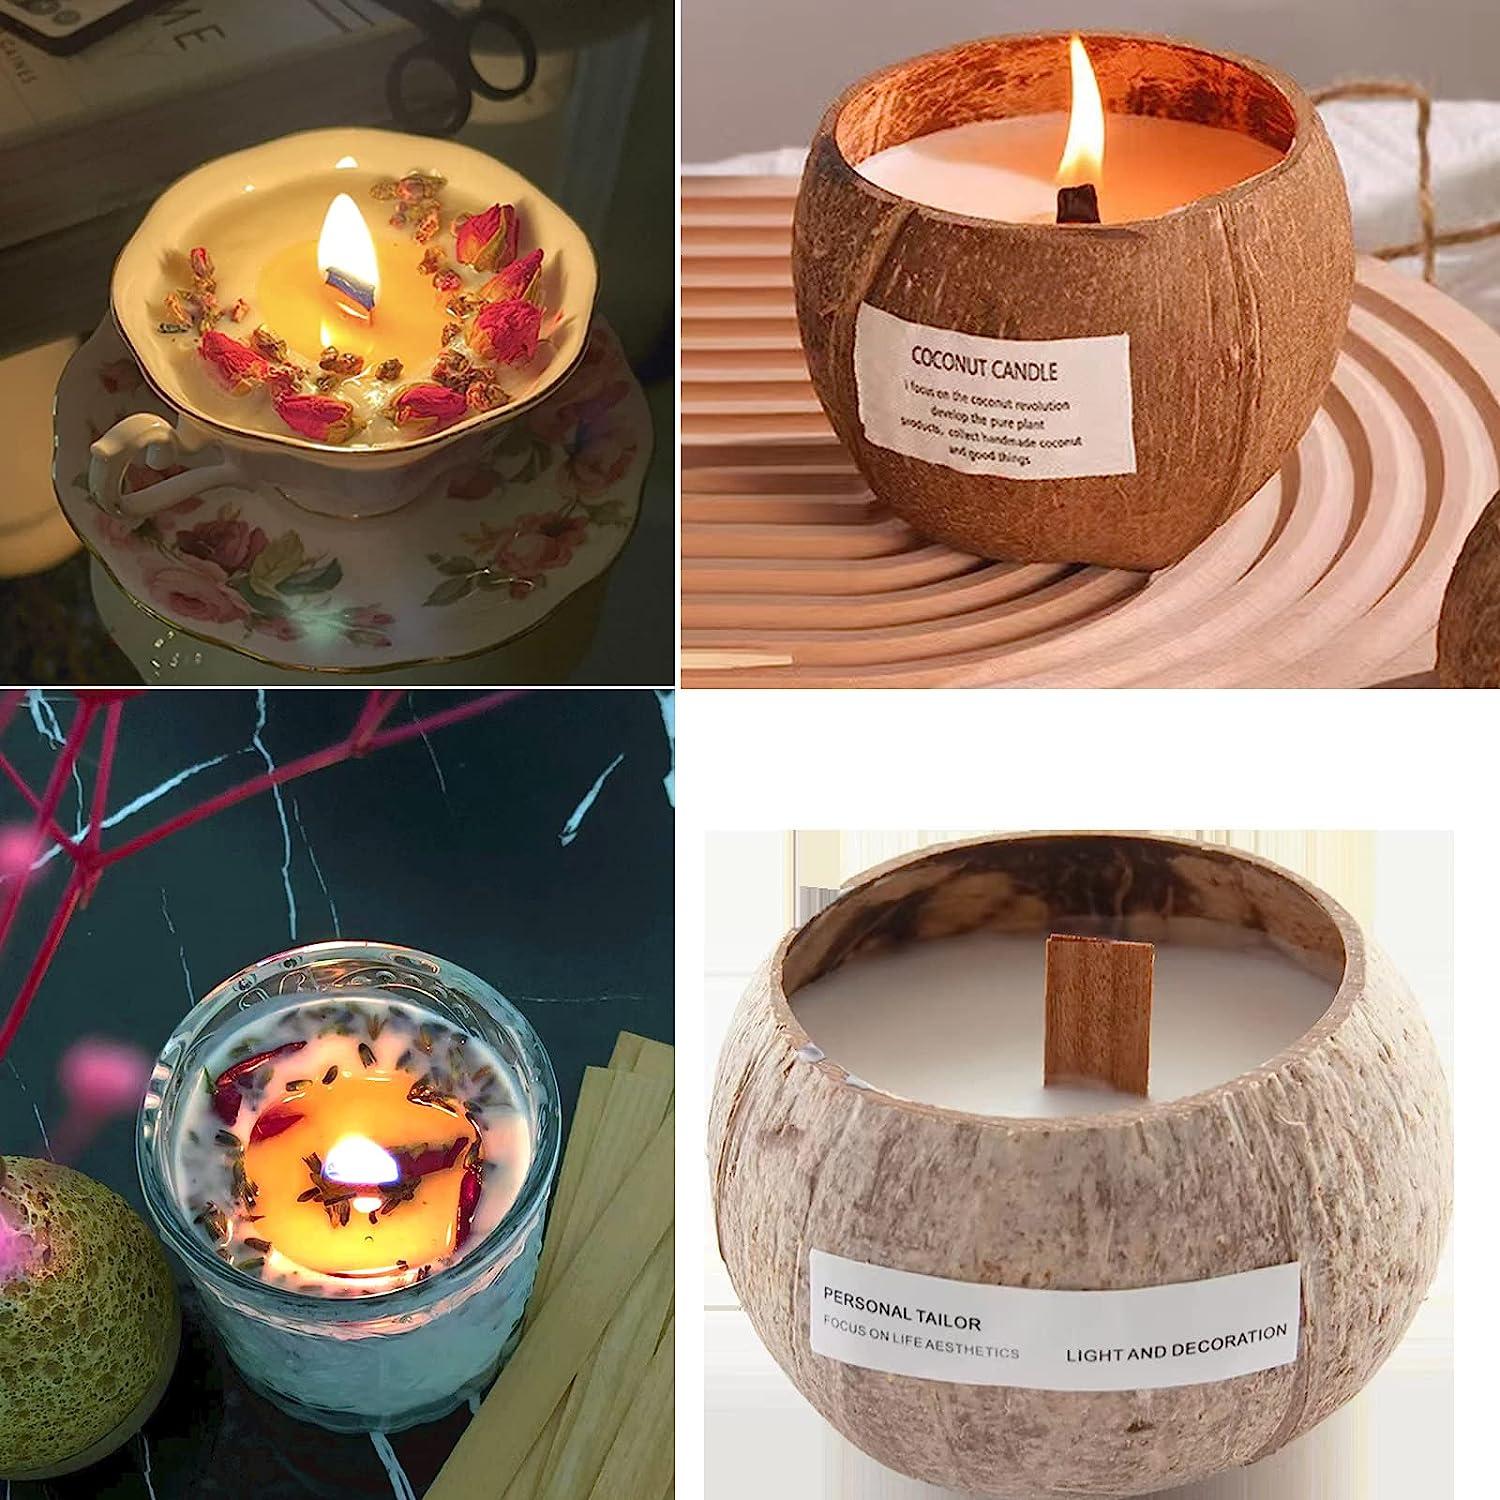 10Pcs Wood Candle Wicks Candle Cores Natural Wood Wick with Iron Stand DIY  Handmade Craft Making